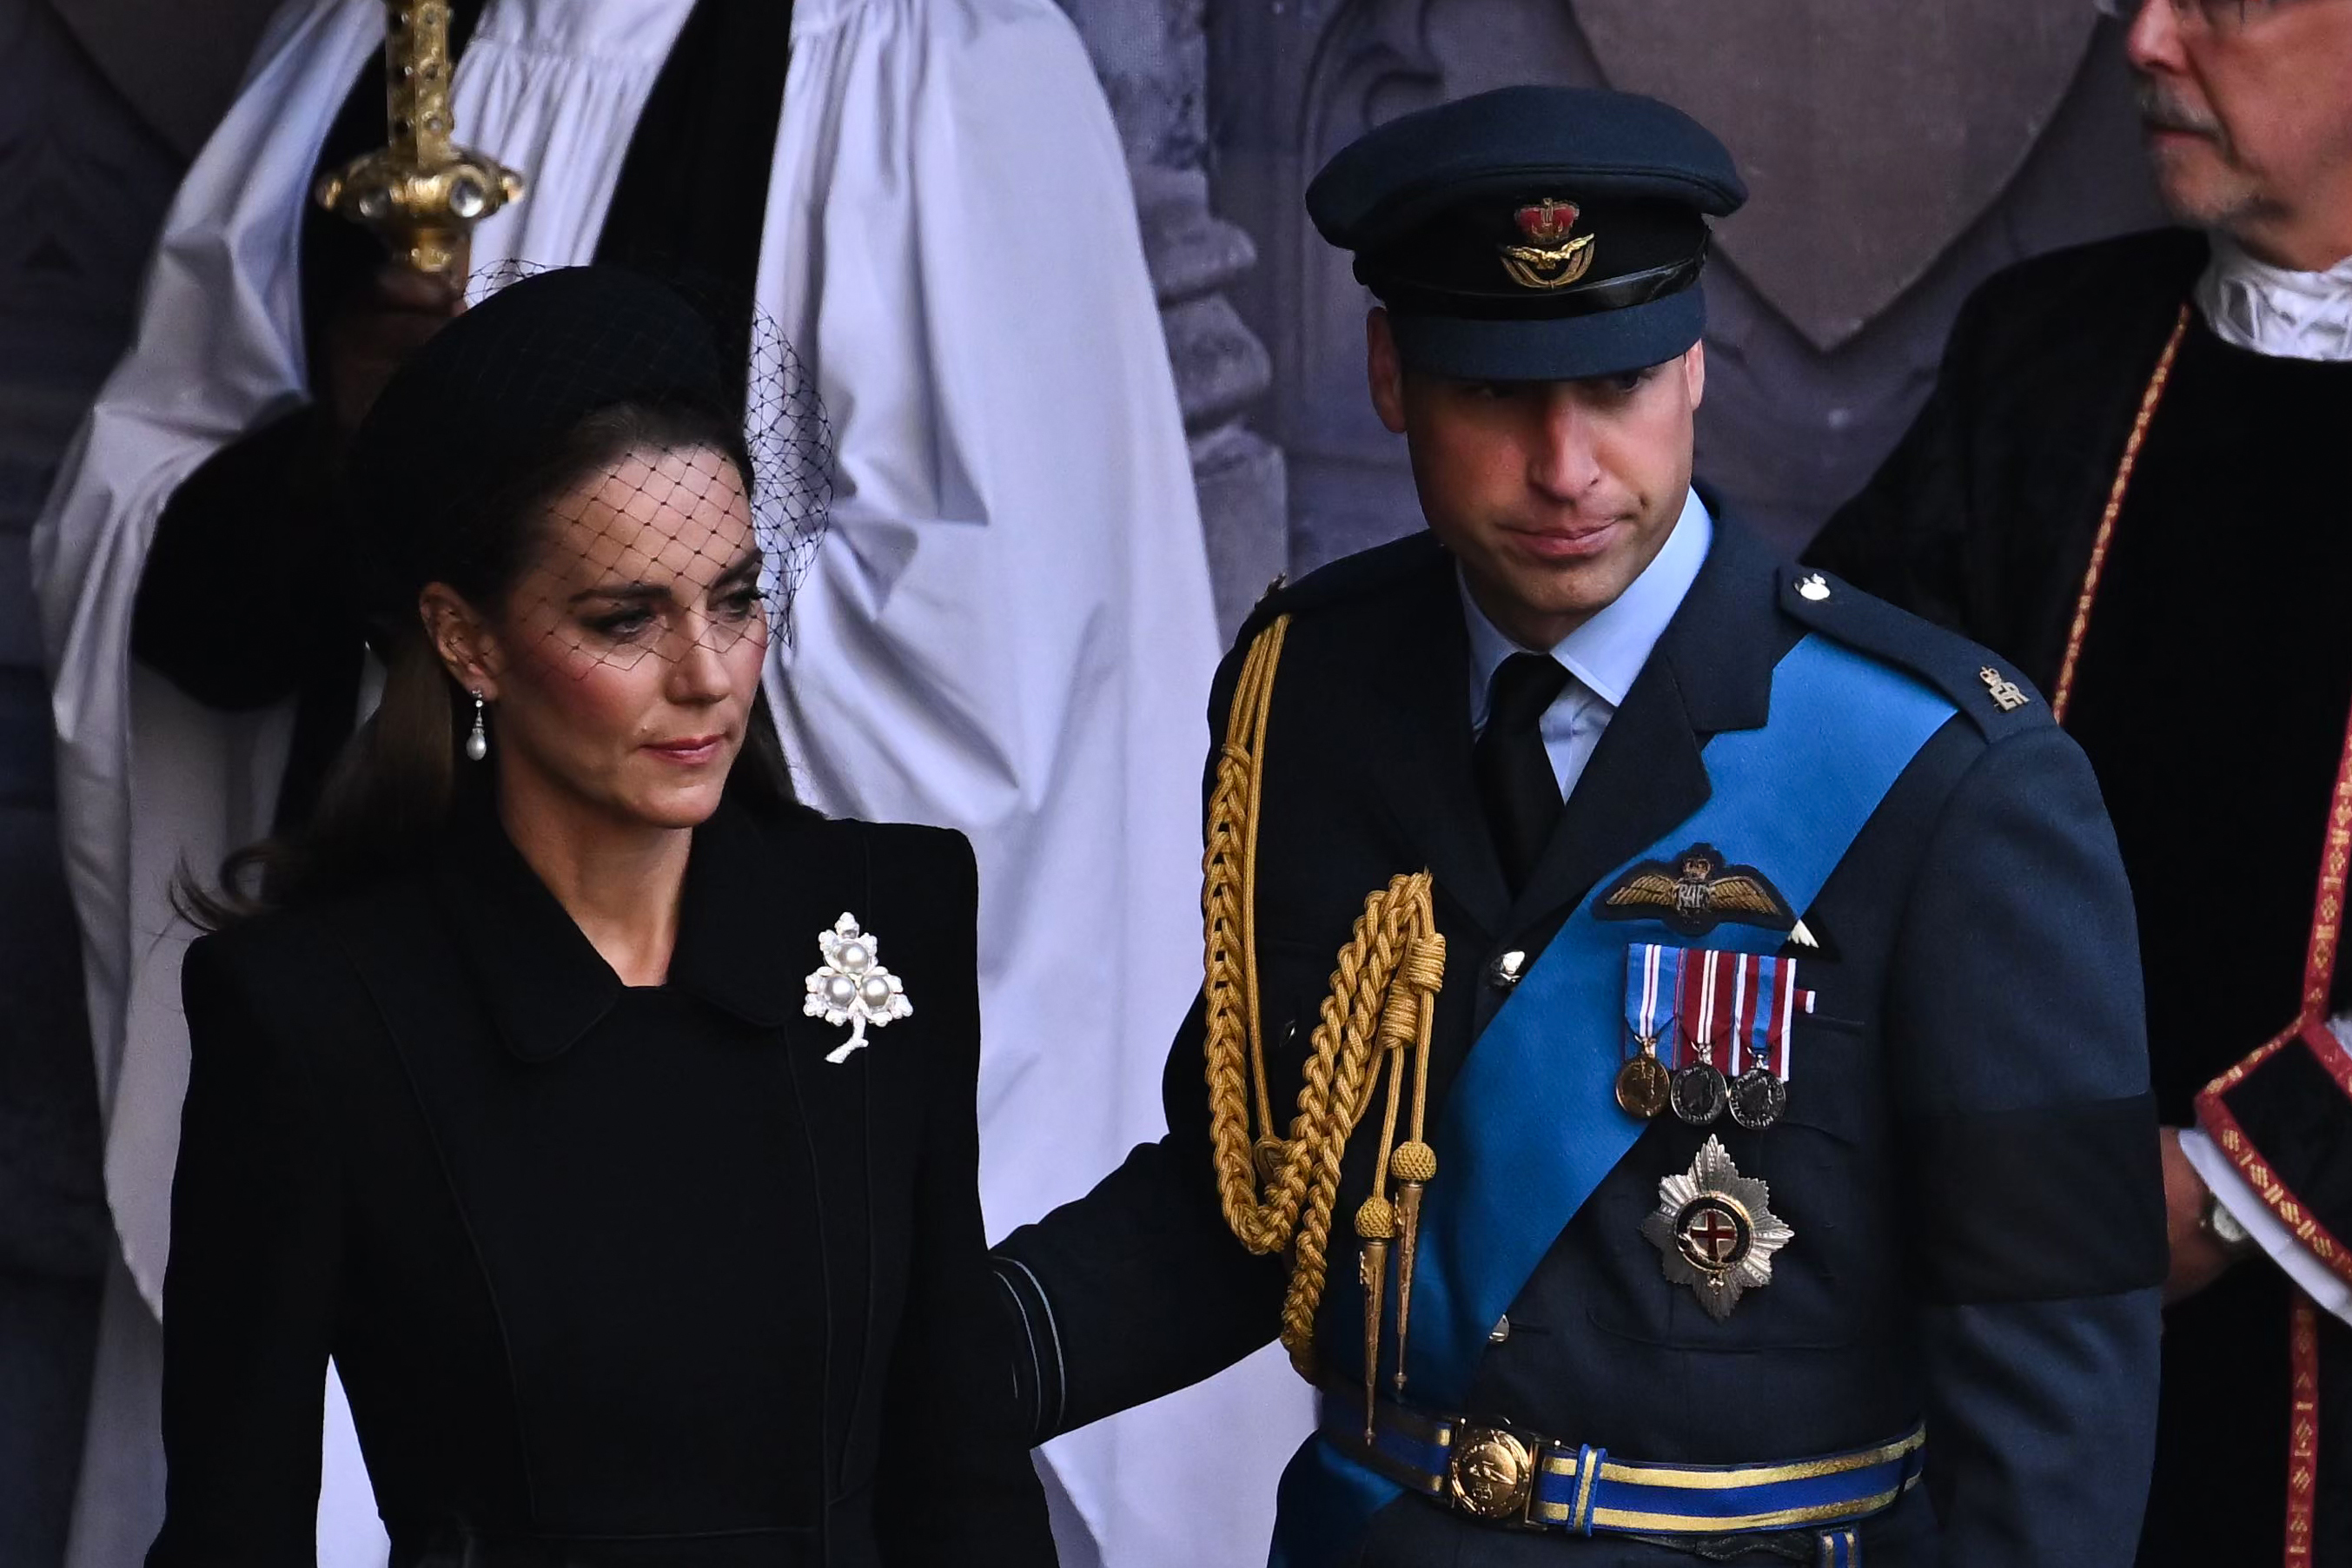 The Prince and Princess of Wales leave after a service for the reception of Queen Elizabeth II's coffin at Westminster Hall